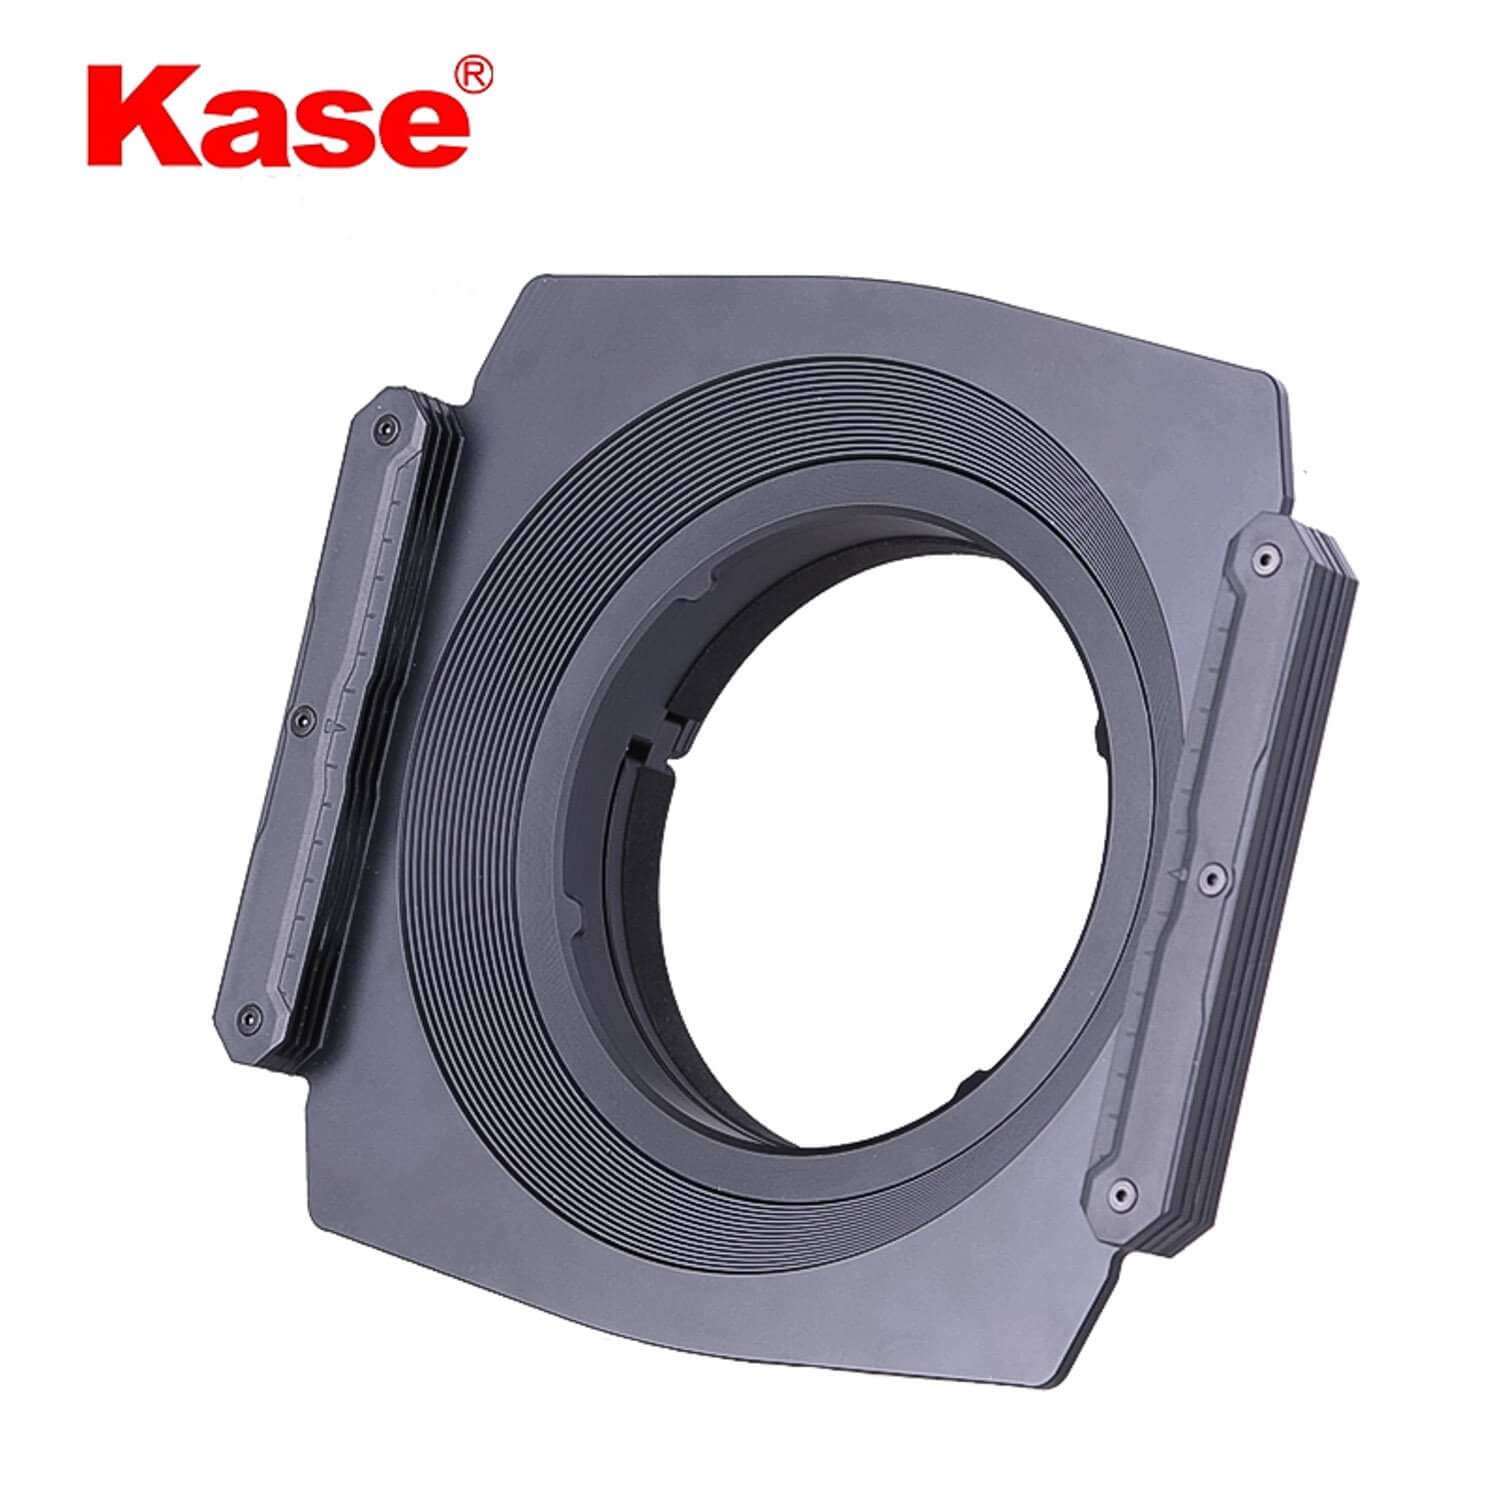 K150 Filter Holder for Carl Zeiss 15 mm F2.8 DISTAGON